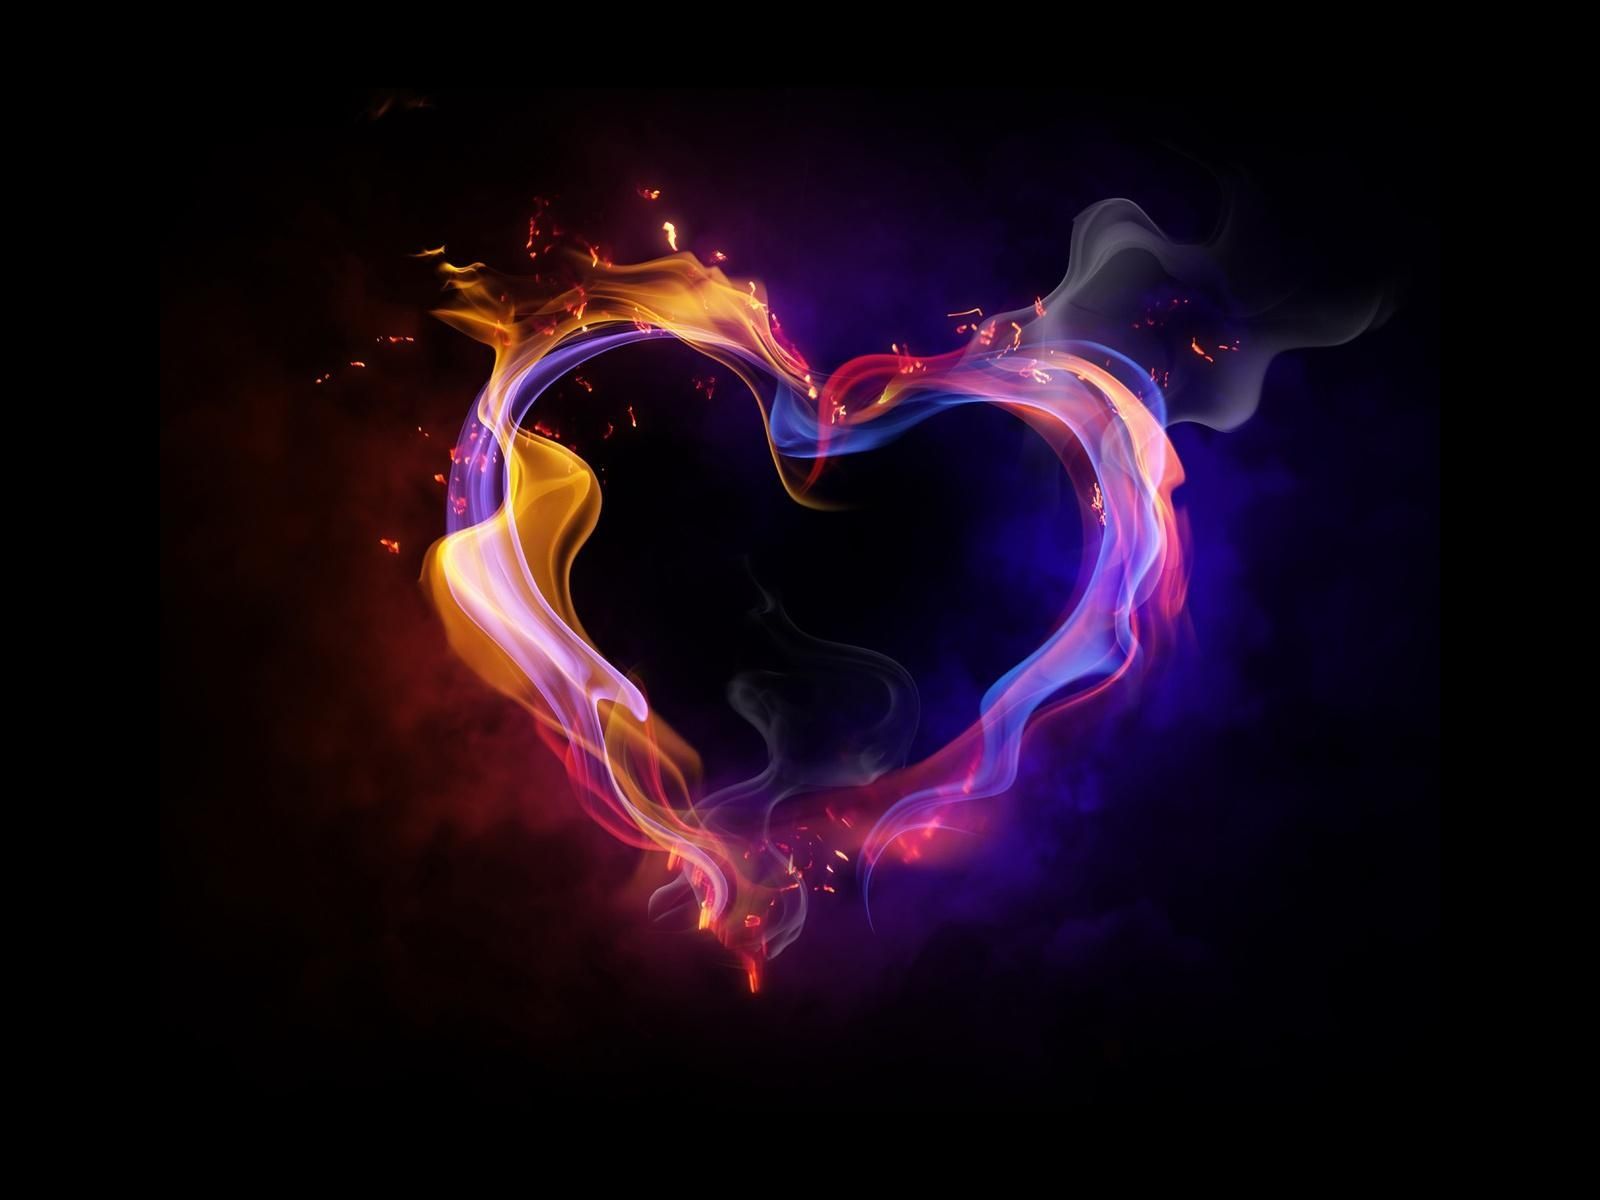 Amazing Hearts. related posts love heart background wallpaper amazing heart shaped. Fire heart, Heart wallpaper, Heart in nature